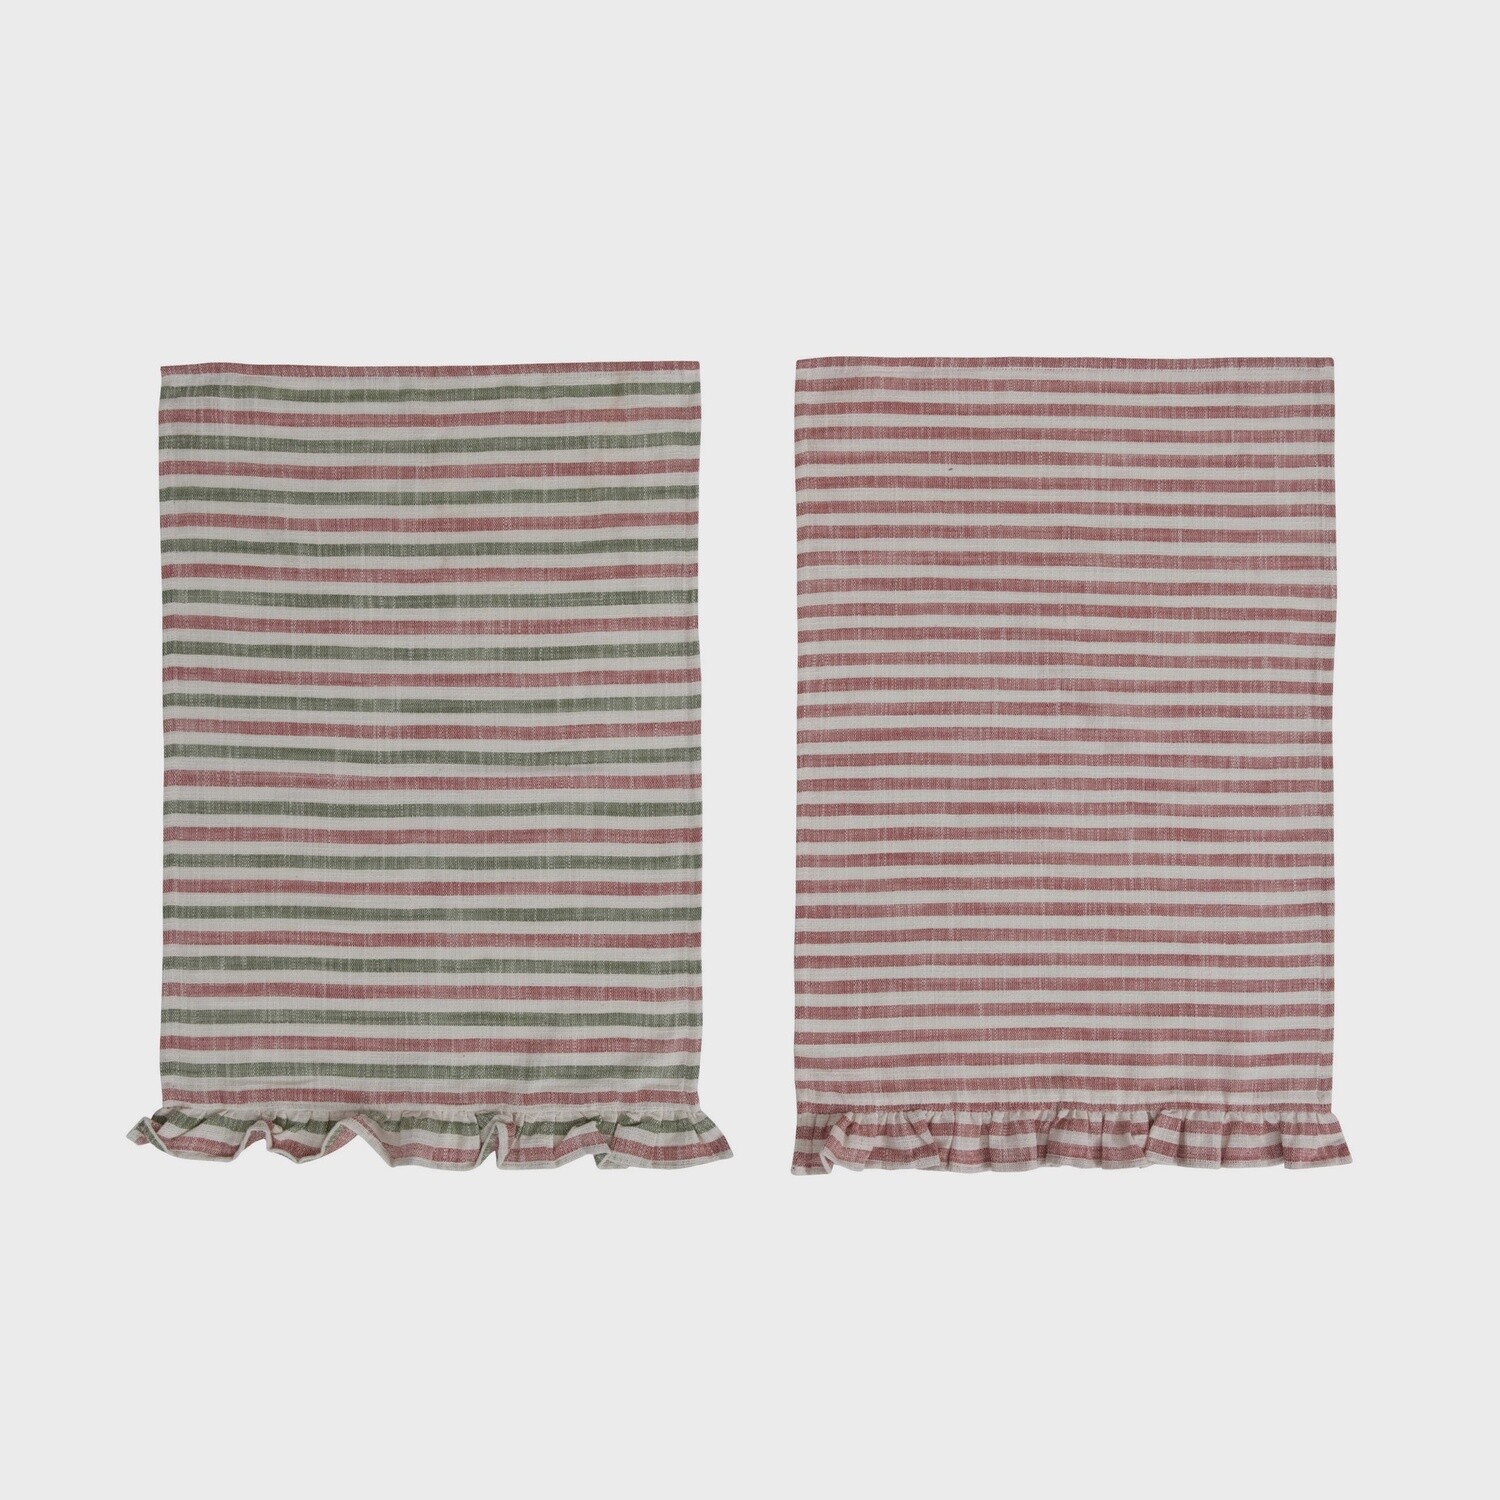 28"L x 18"W Woven Cotton Striped Tea Towel with Ruffle, 2 Colors